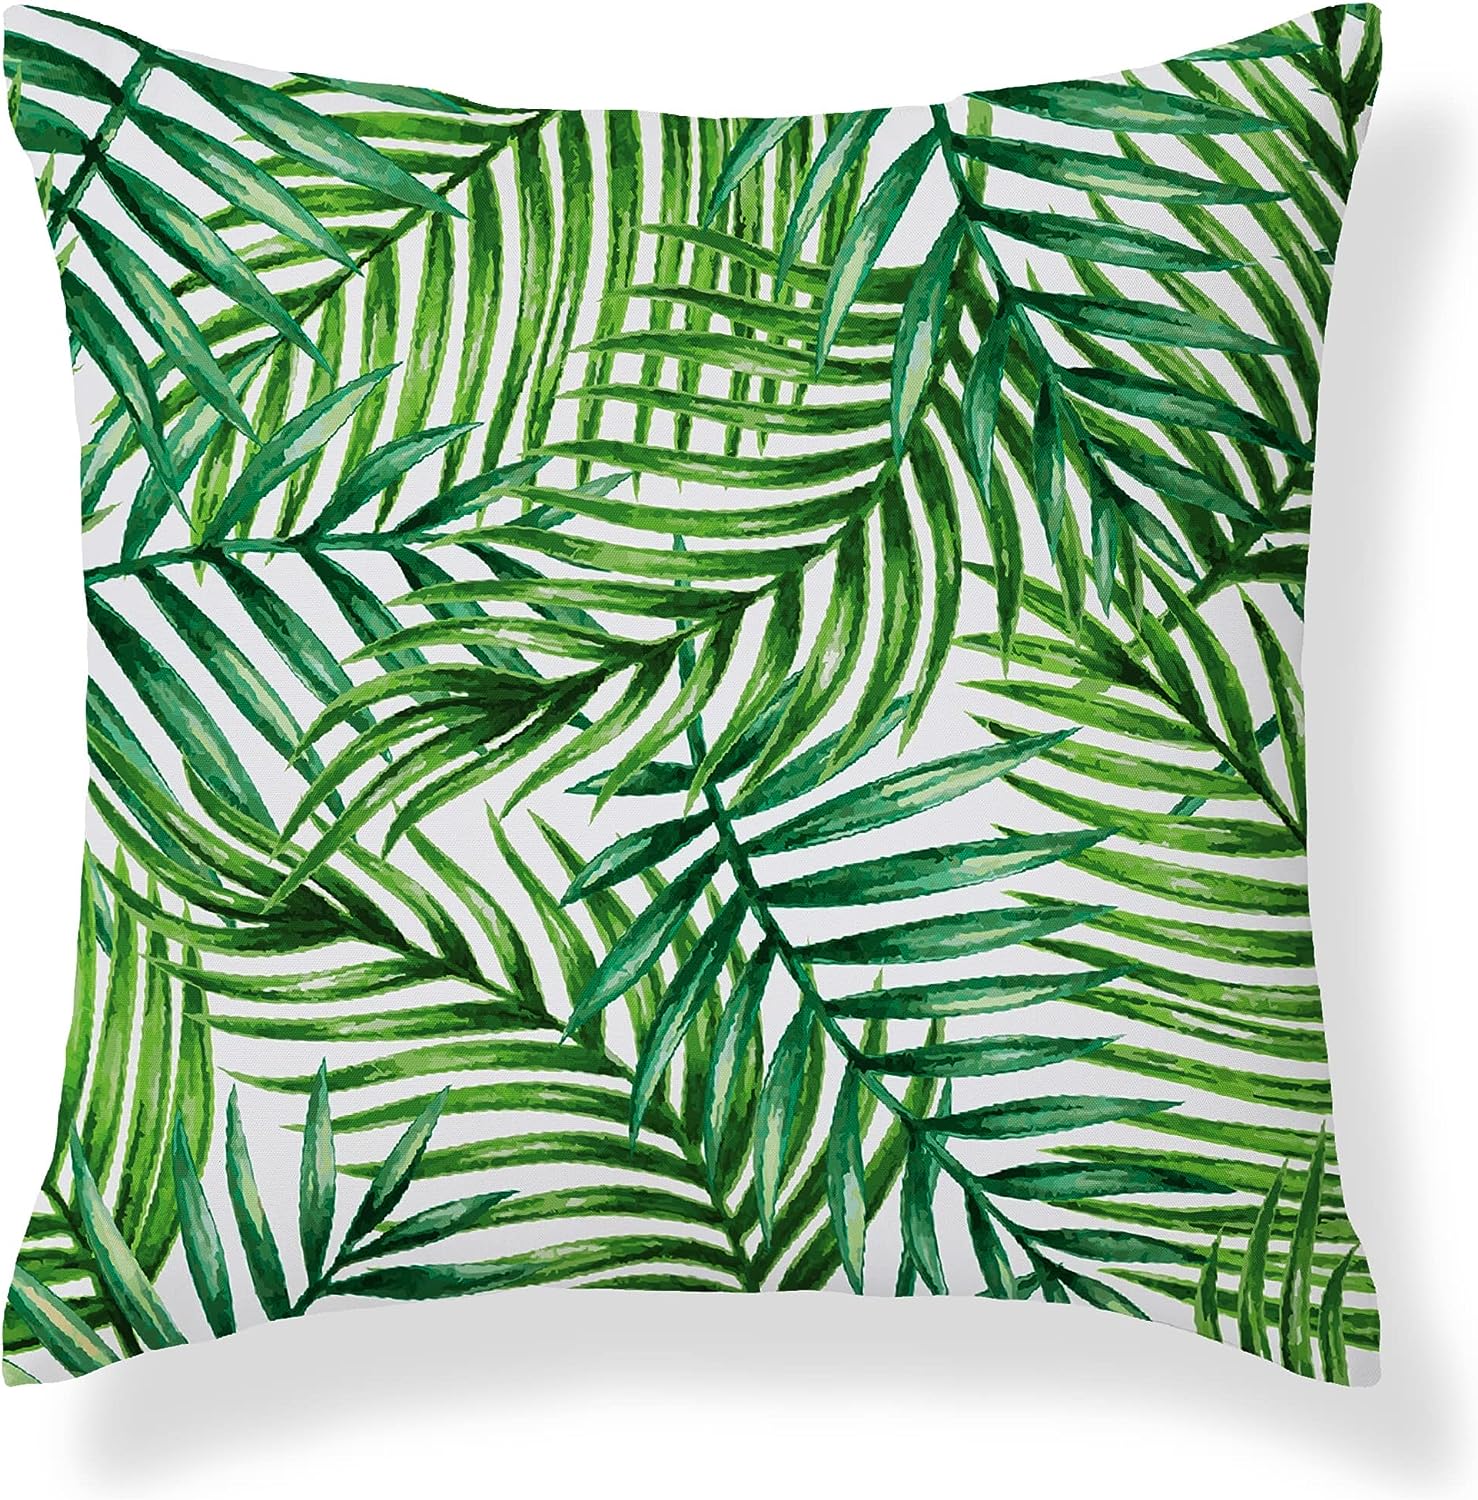 Set of 2 Palm Leaf Garden White Square Water Resistant Cushions